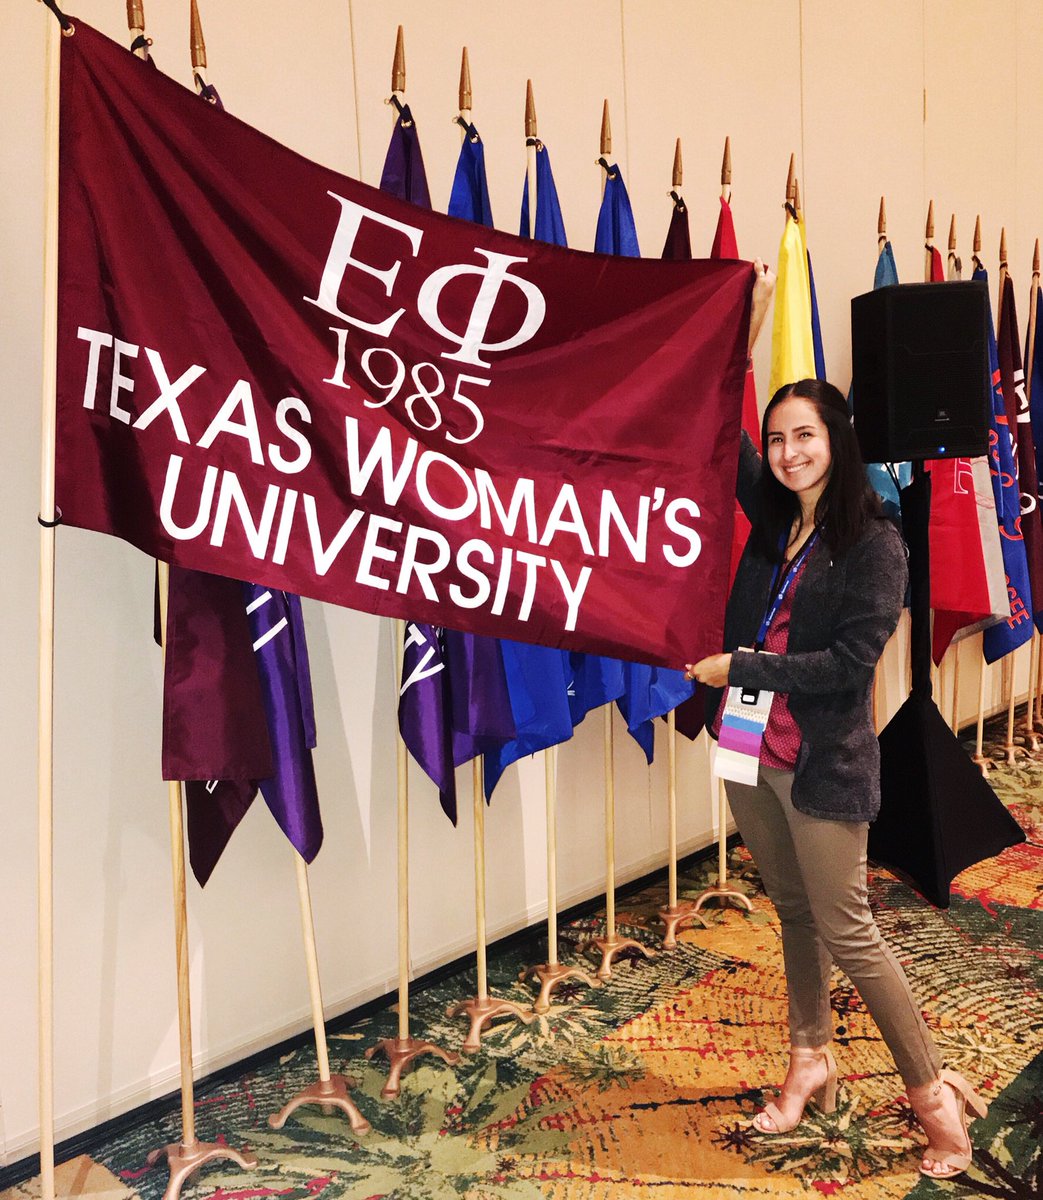 Look how cute our prez looks in front of our official flag at the #alphagamconvention !!